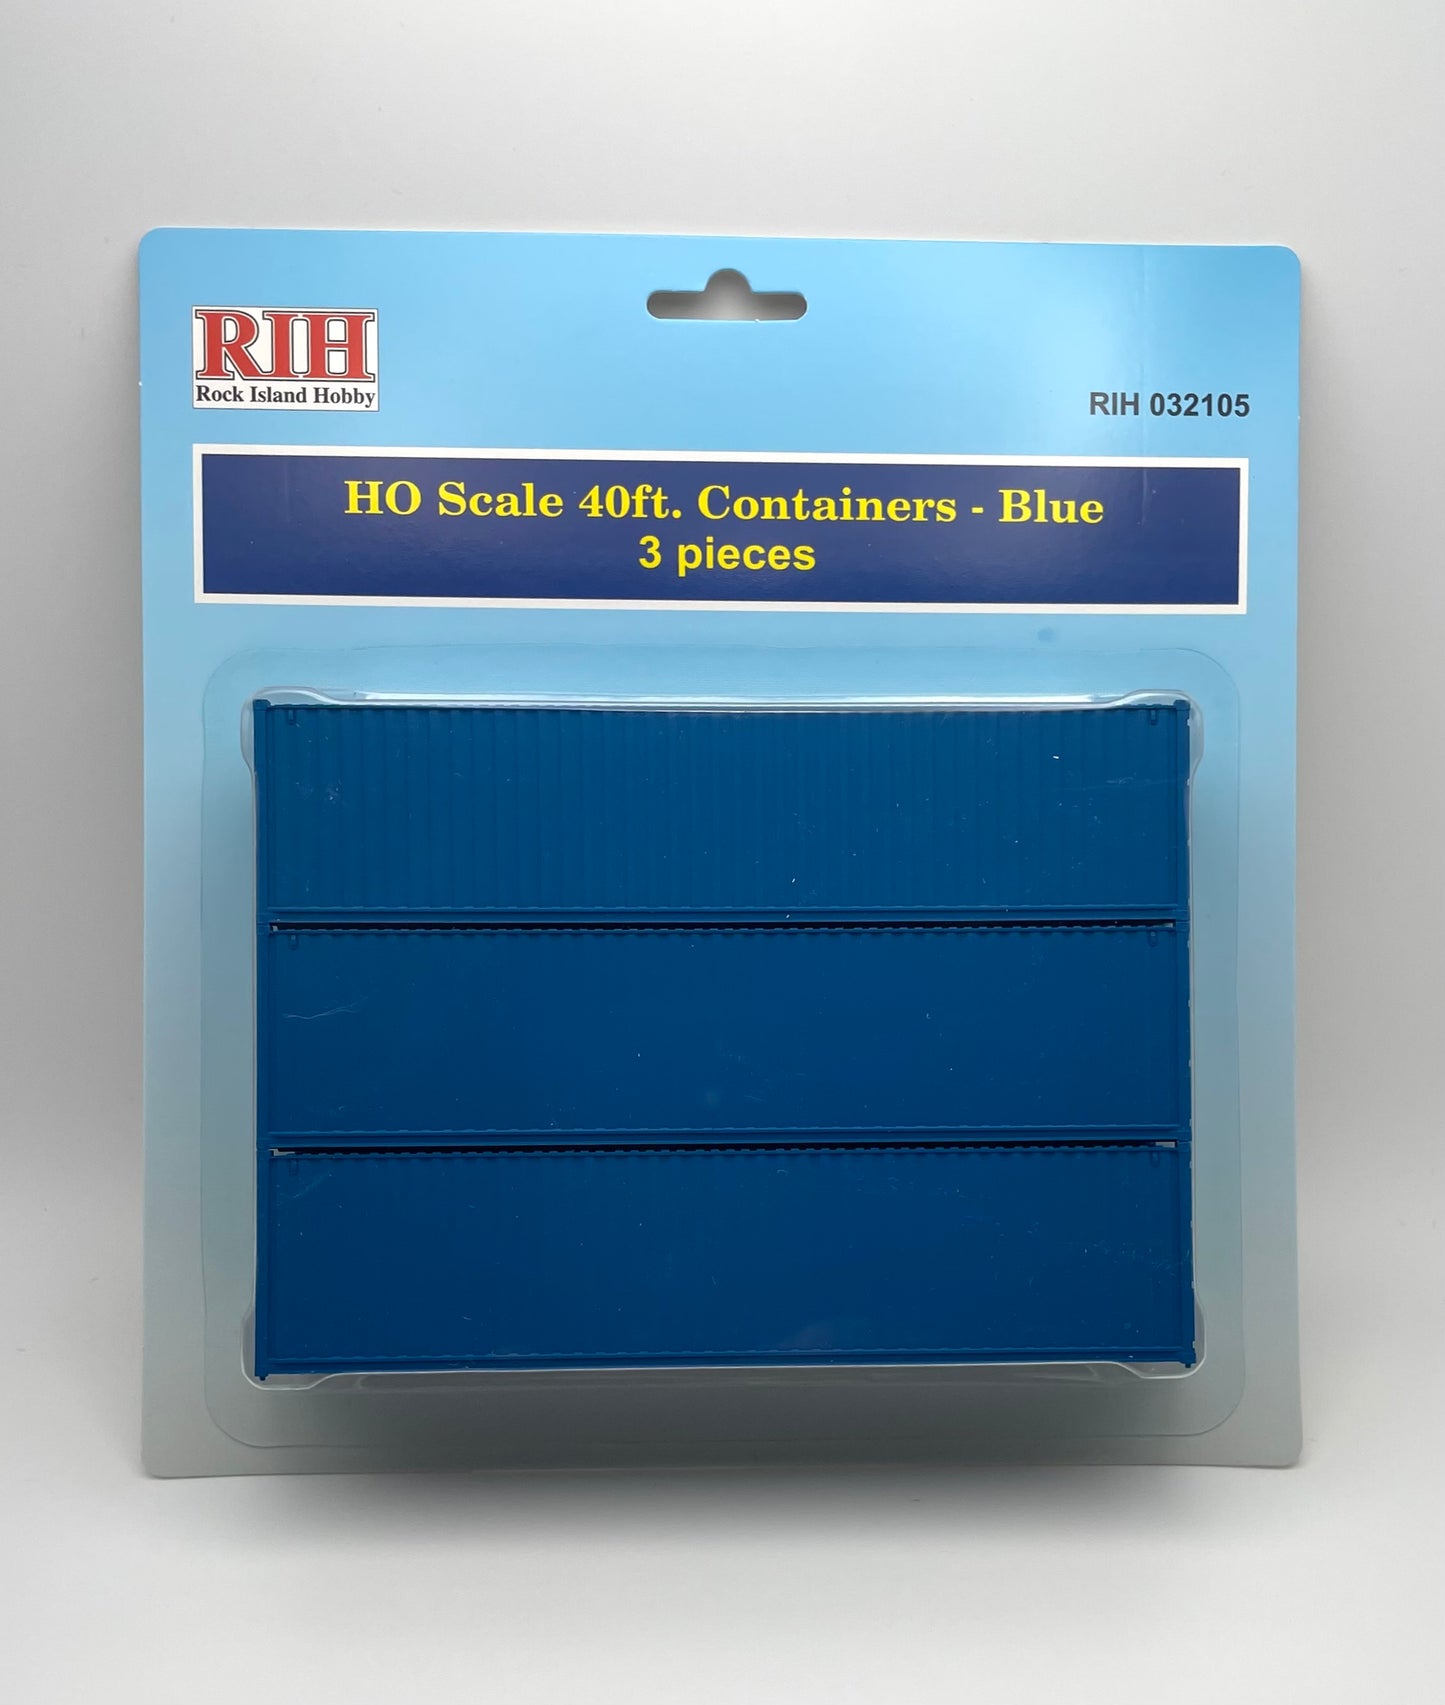 HO Scale 40ft Containers - Blue